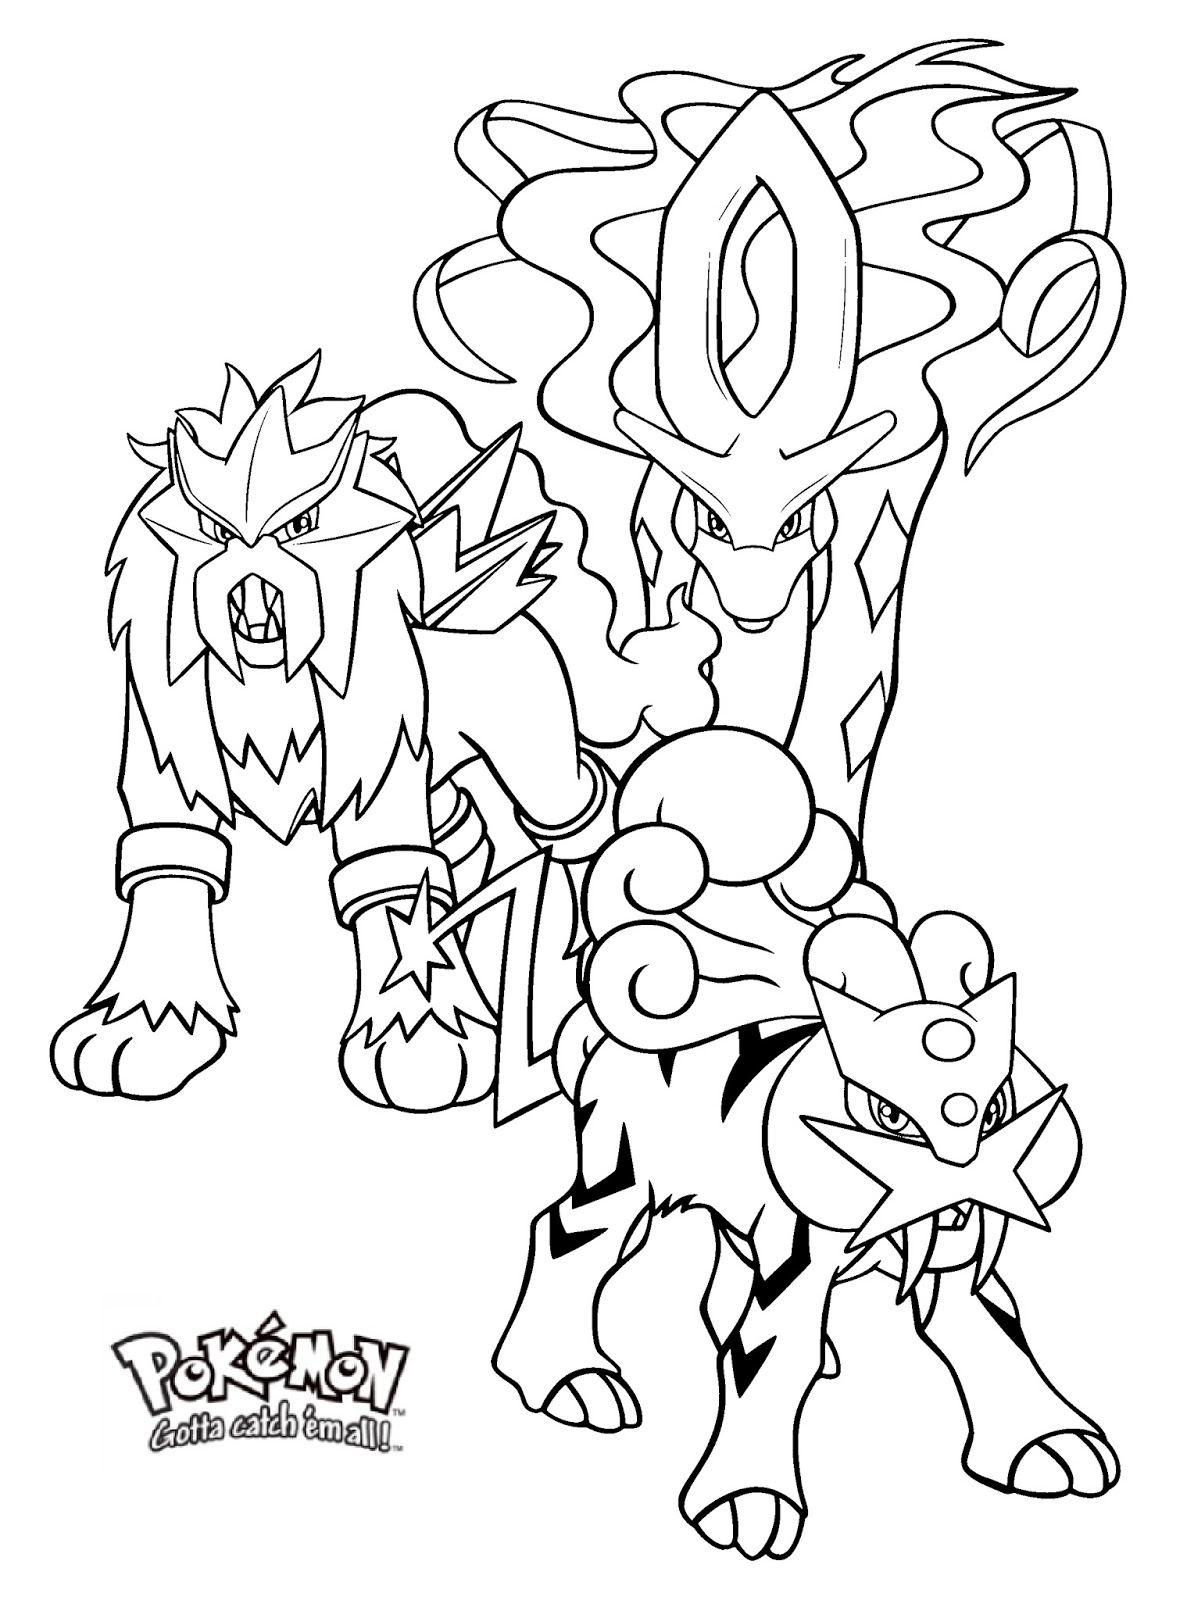 Printable Legendary Pokemon Coloring Pages - Legendary Pokemon Coloring Book